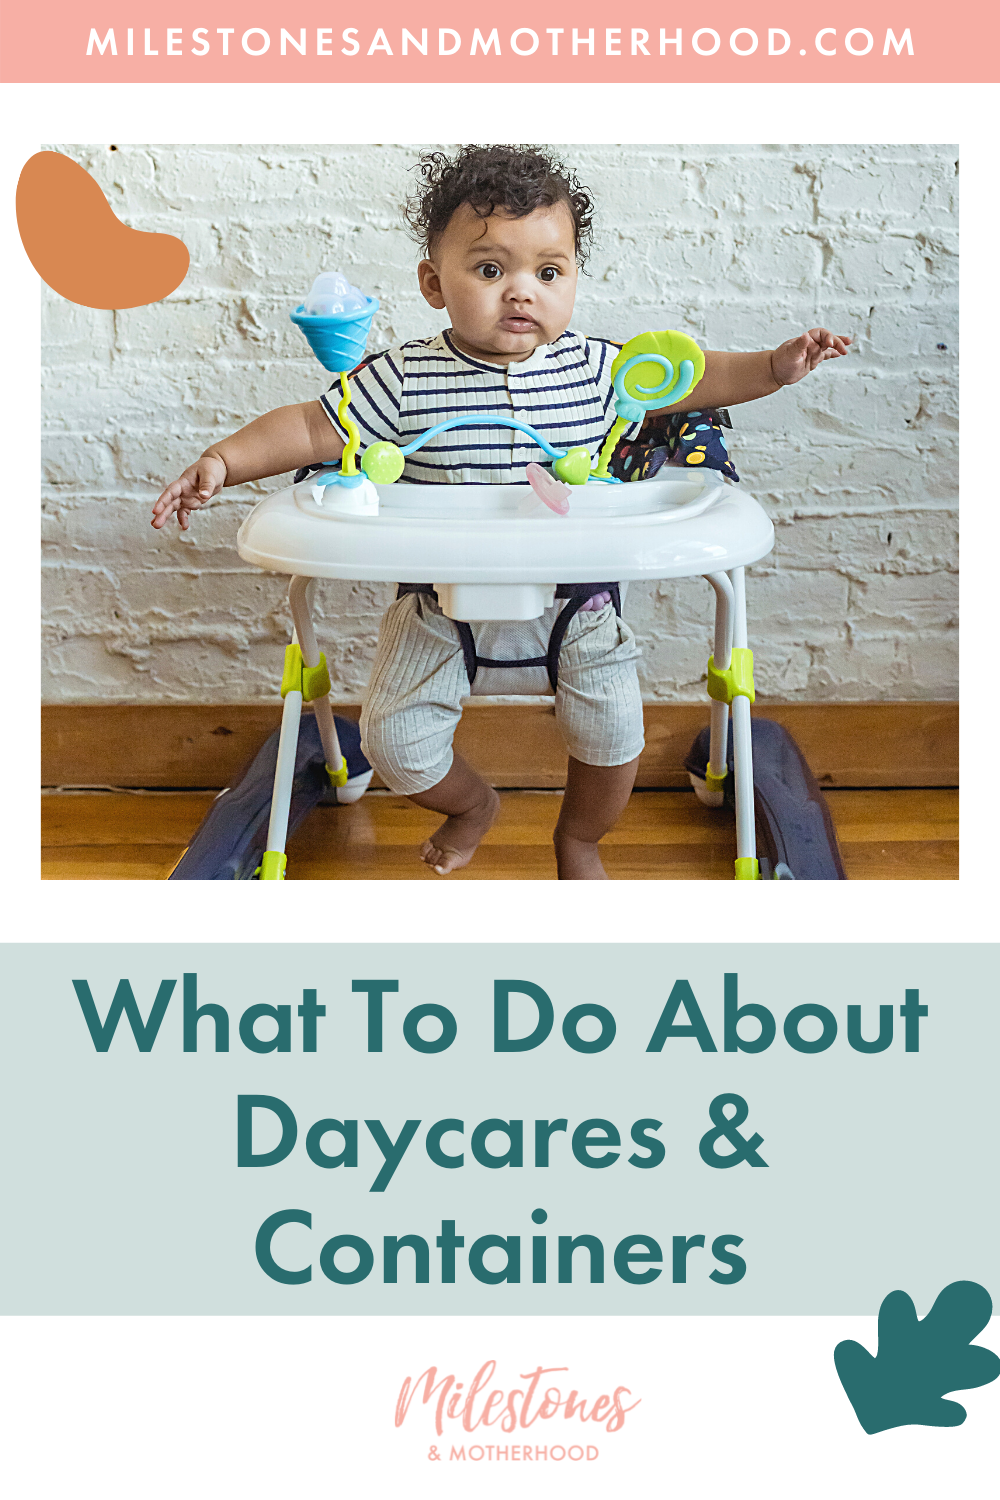 What To Do About Daycares & Containers — Milestones & Motherhood